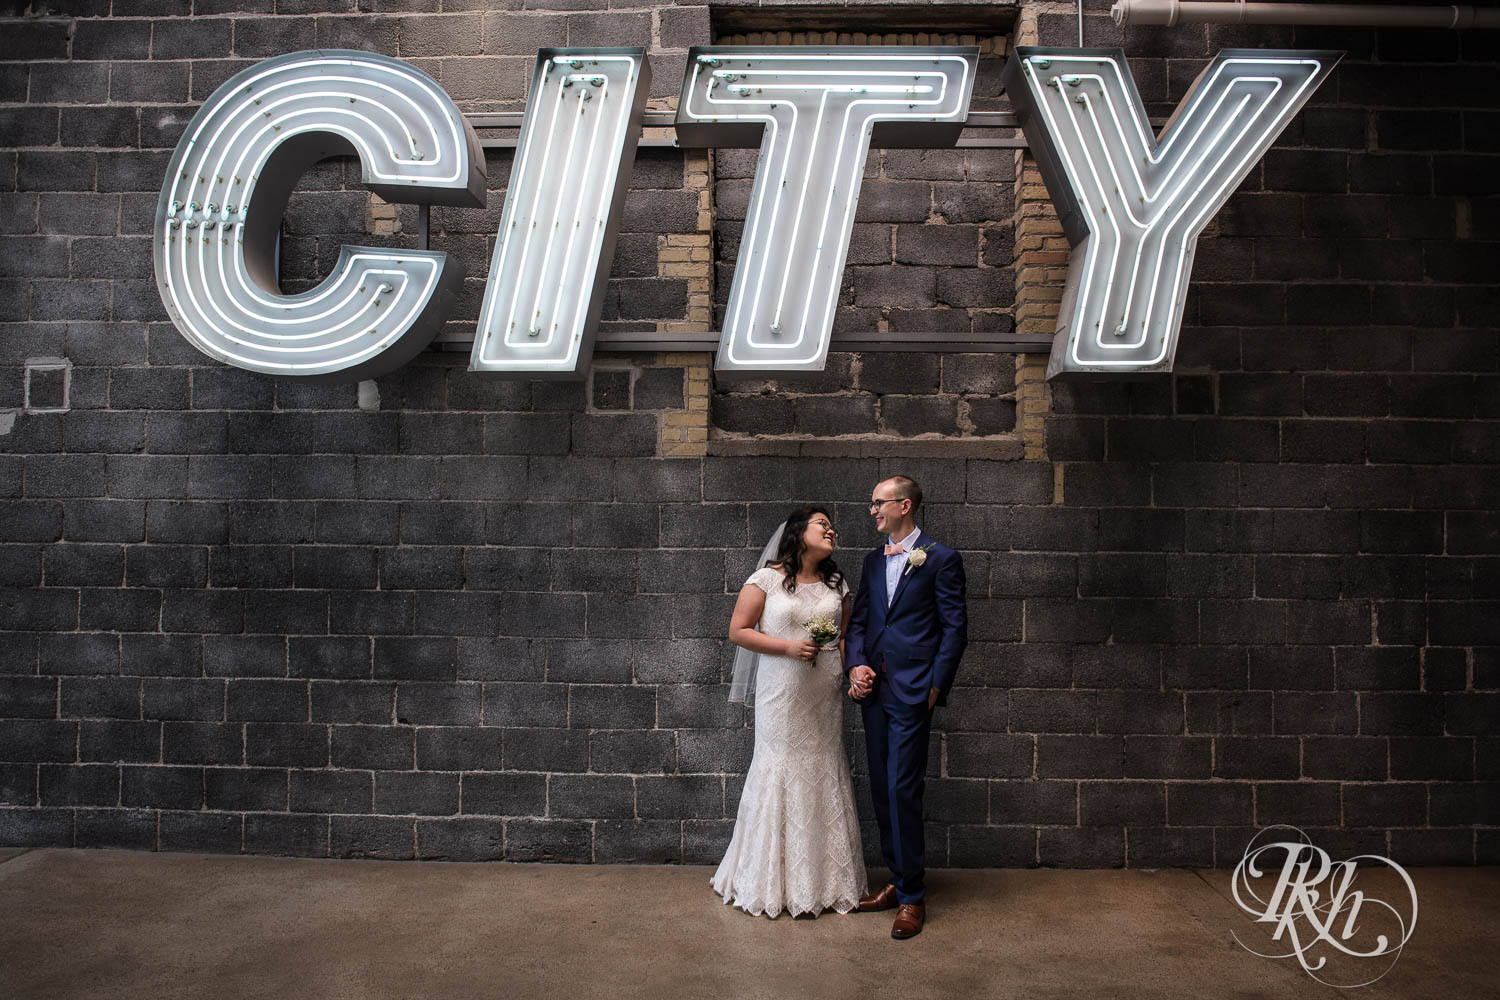 Asian bride and groom smile under city sign at 612 Brew in Minneapolis, Minnesota.